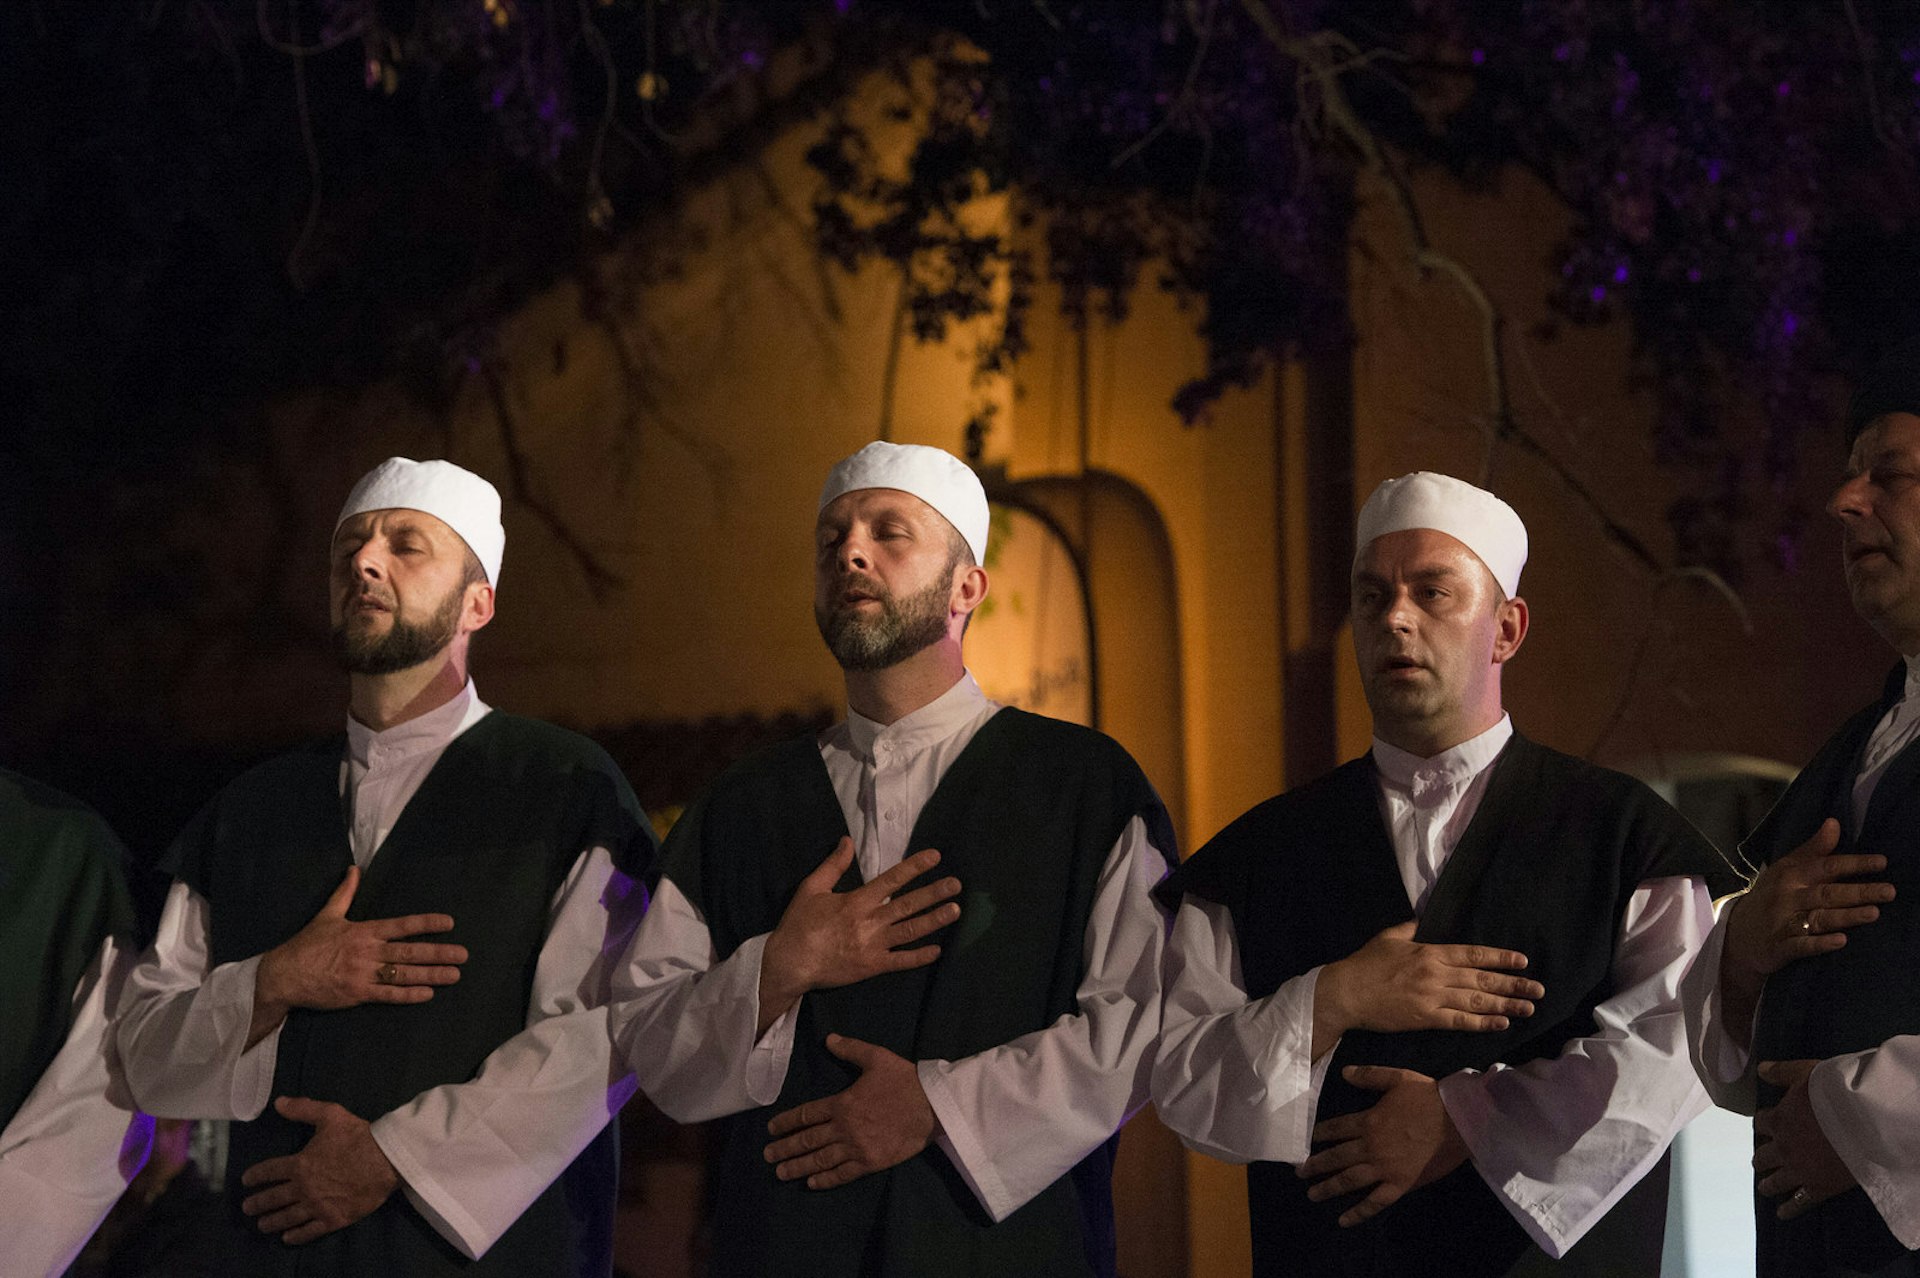 Singers from the Tariqa (brotherhood) Qadiriyya from Bosnia, during the festival of sufi culture in Fez, Morocco